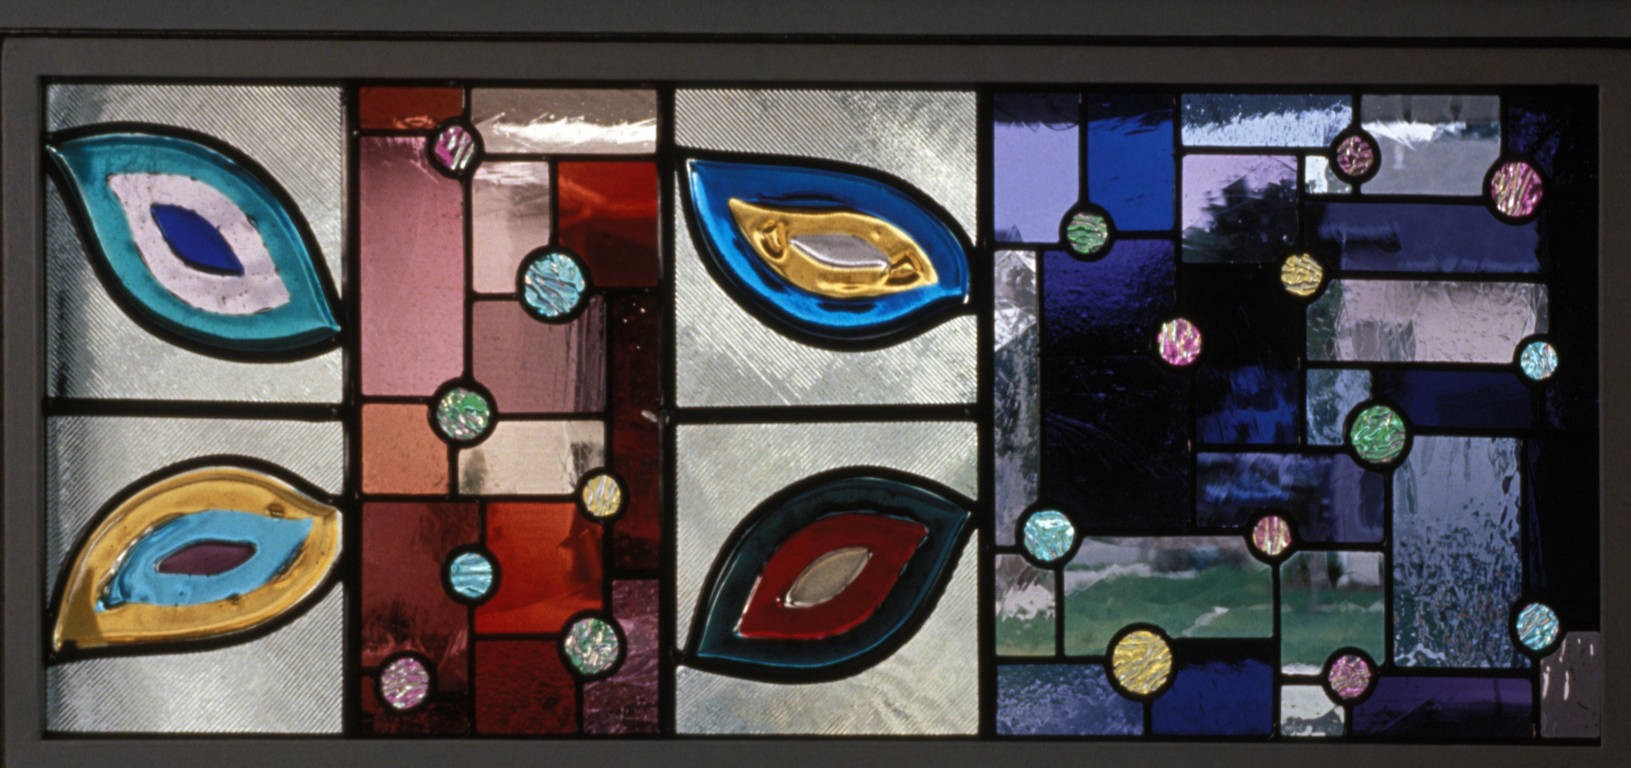 Detail featuring the colored fields with spons and a fused glass tree motif